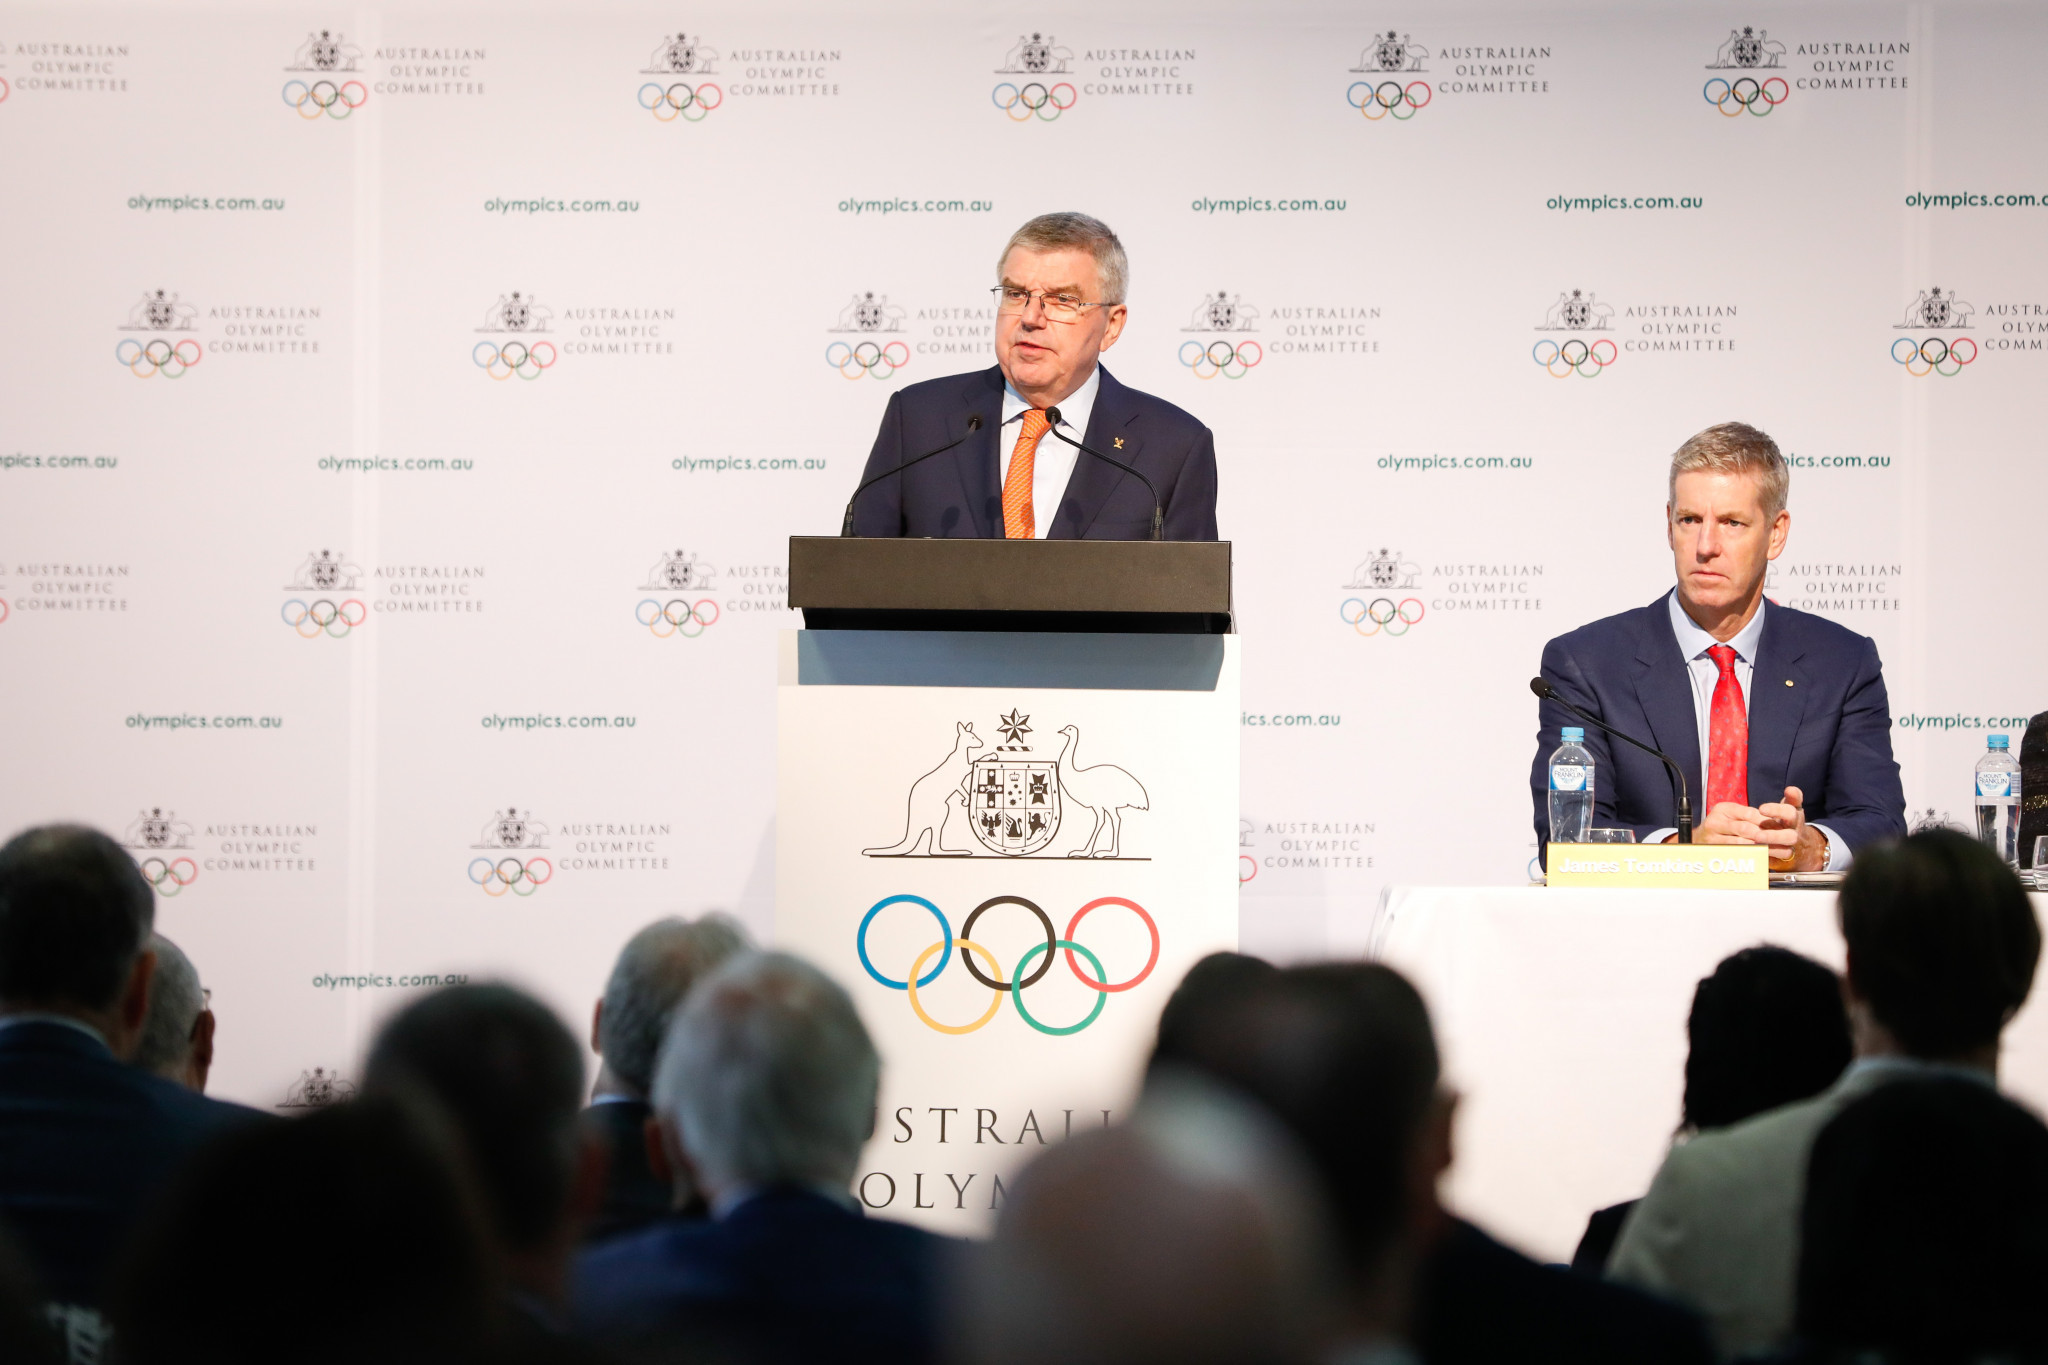 An IOC working group will study the CAS decision on Caster Semenya, its President Thomas Bach revealed while attending the Australian Olympic Committee Annual General Meeting in Sydney ©Getty Images